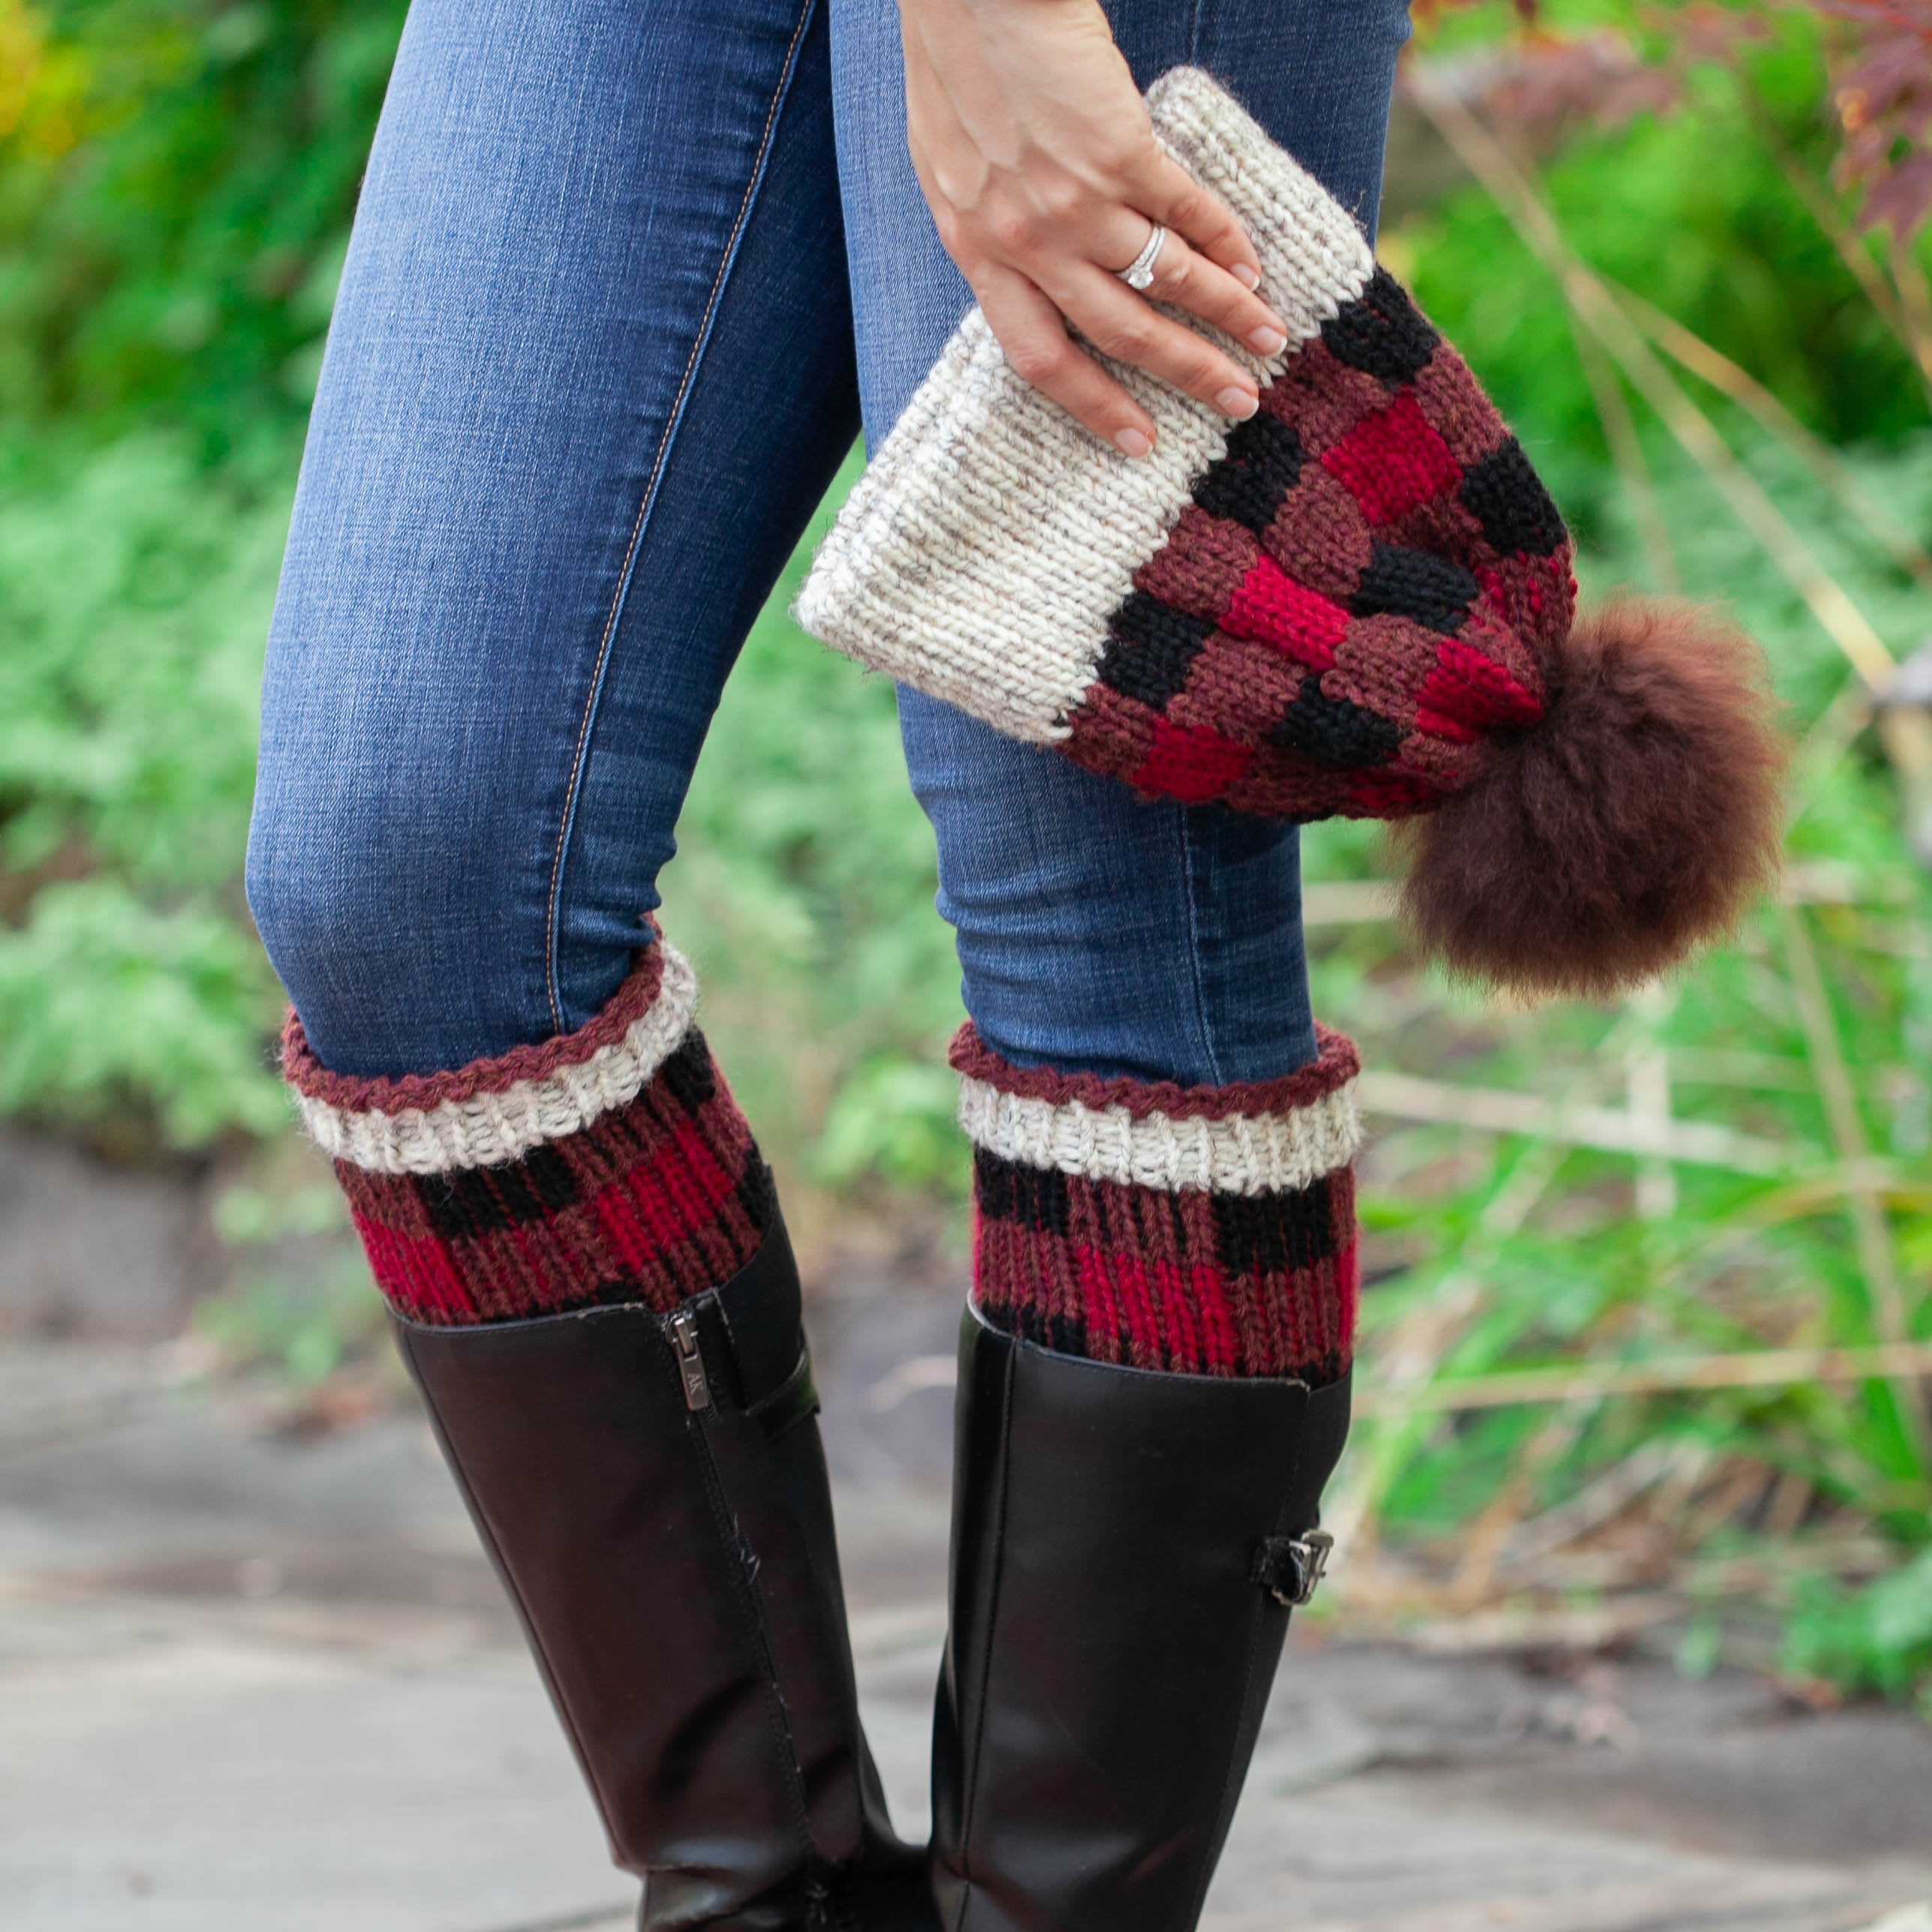 Free Knitting Patterns For Boot Toppers Loom Knit Buffalo Plaid Hat Boot Toppers Pdf Pattern Set Easy Colorwork Beginner Friendly Pattern Download This Is A Digital File